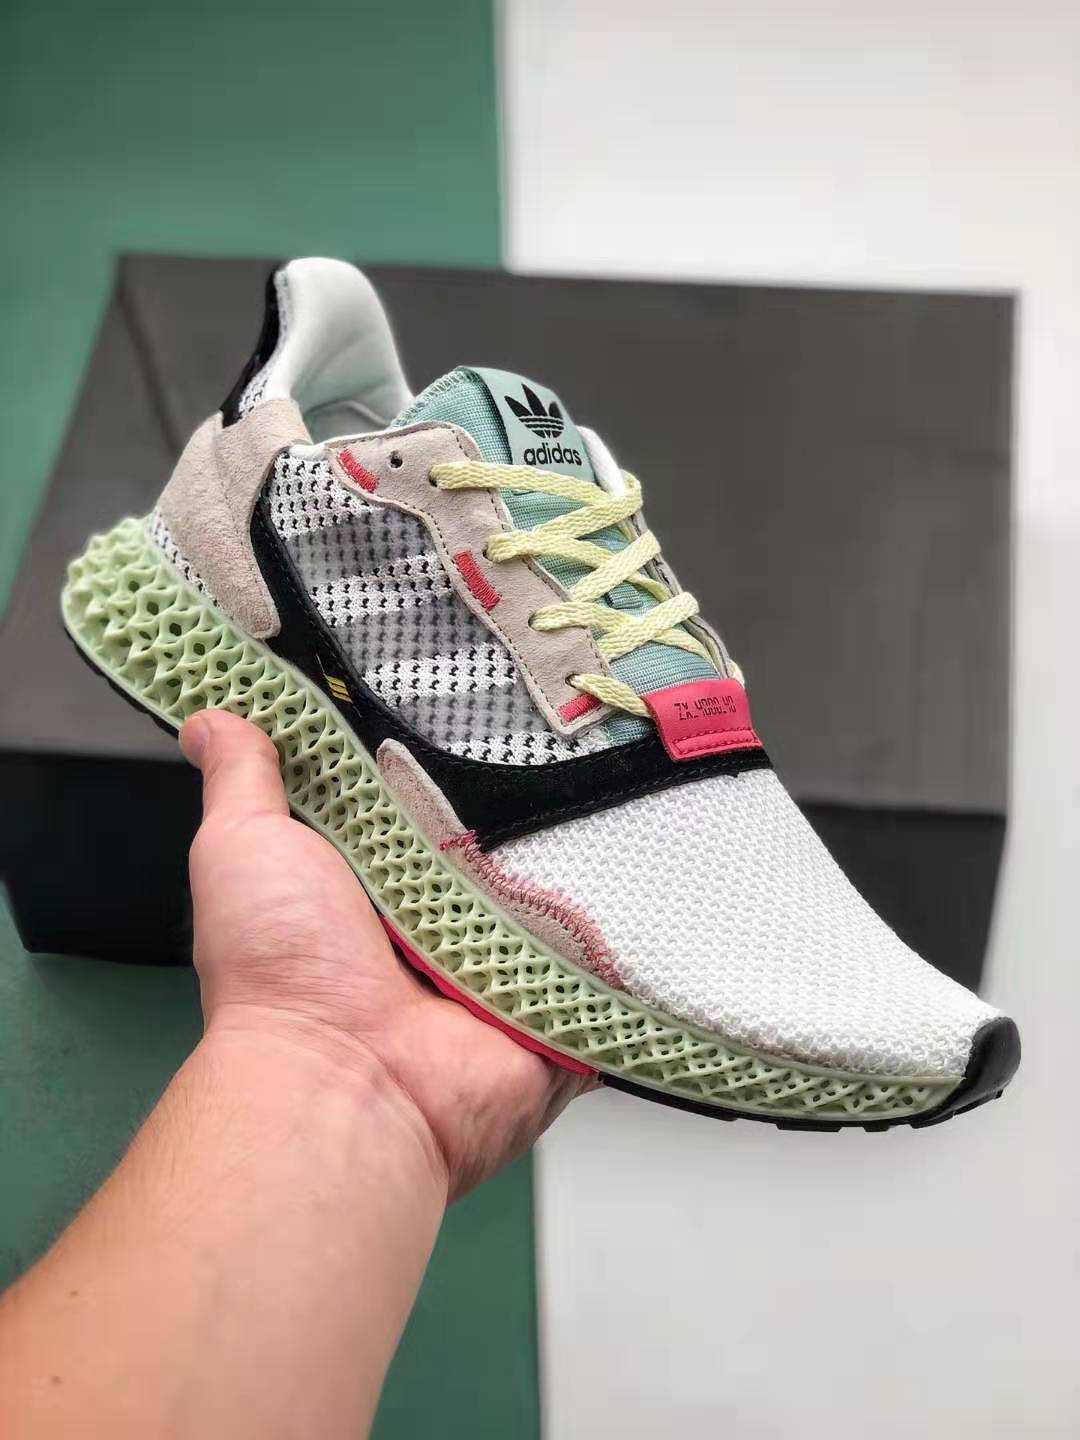 Adidas ZX 4000 Futurecraft 4D Grey One B42203 | Shop Now in a Limited Edition